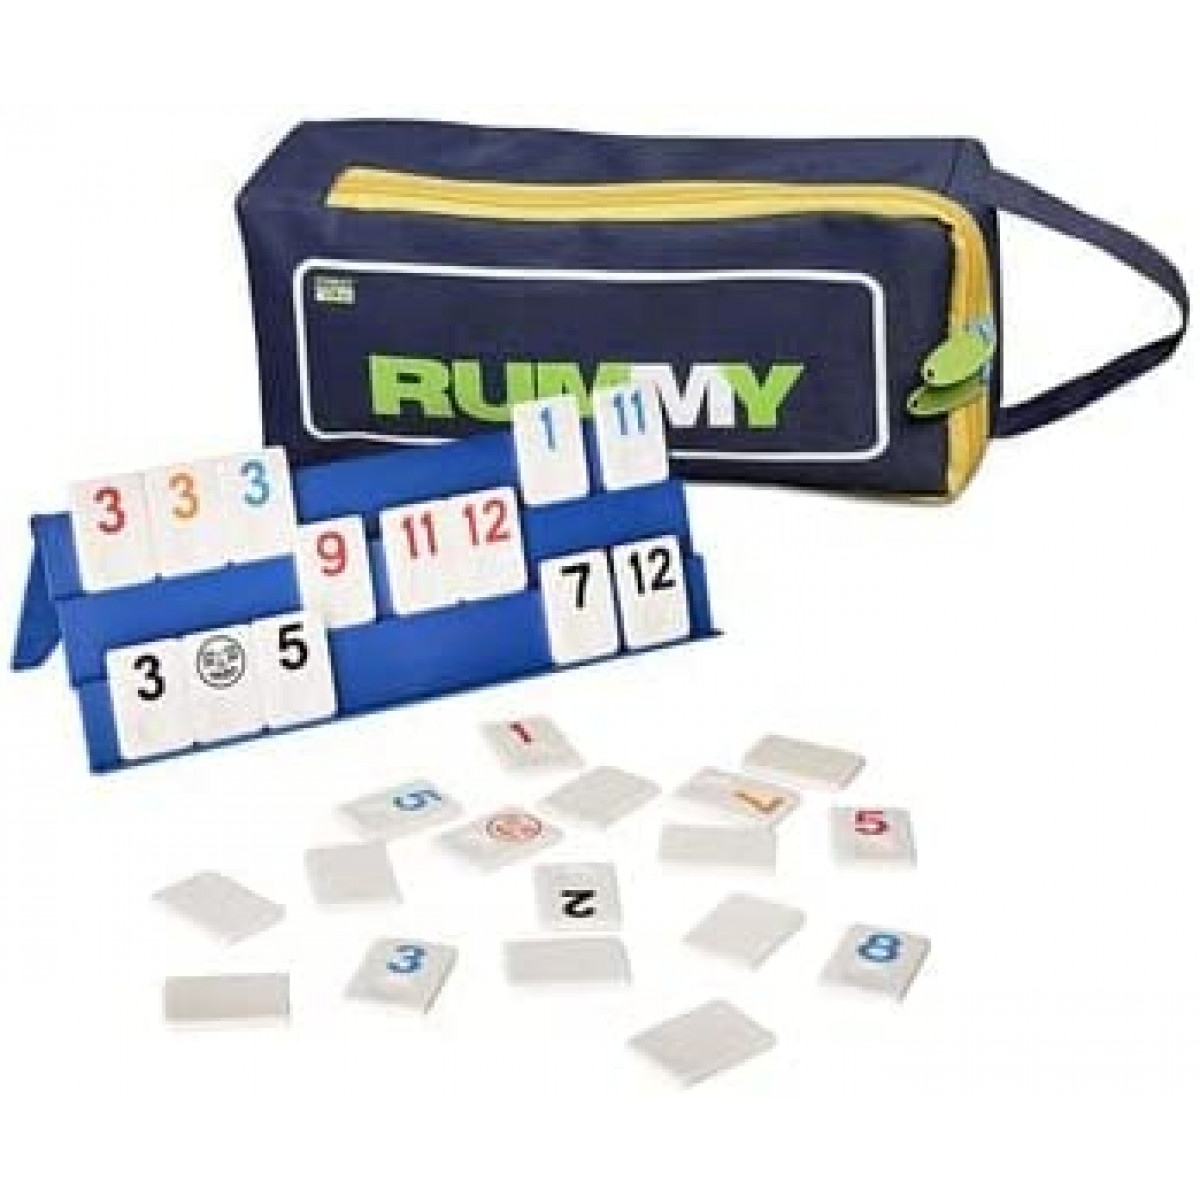  Rummy Cube Game with Case, Classic Rummy Game